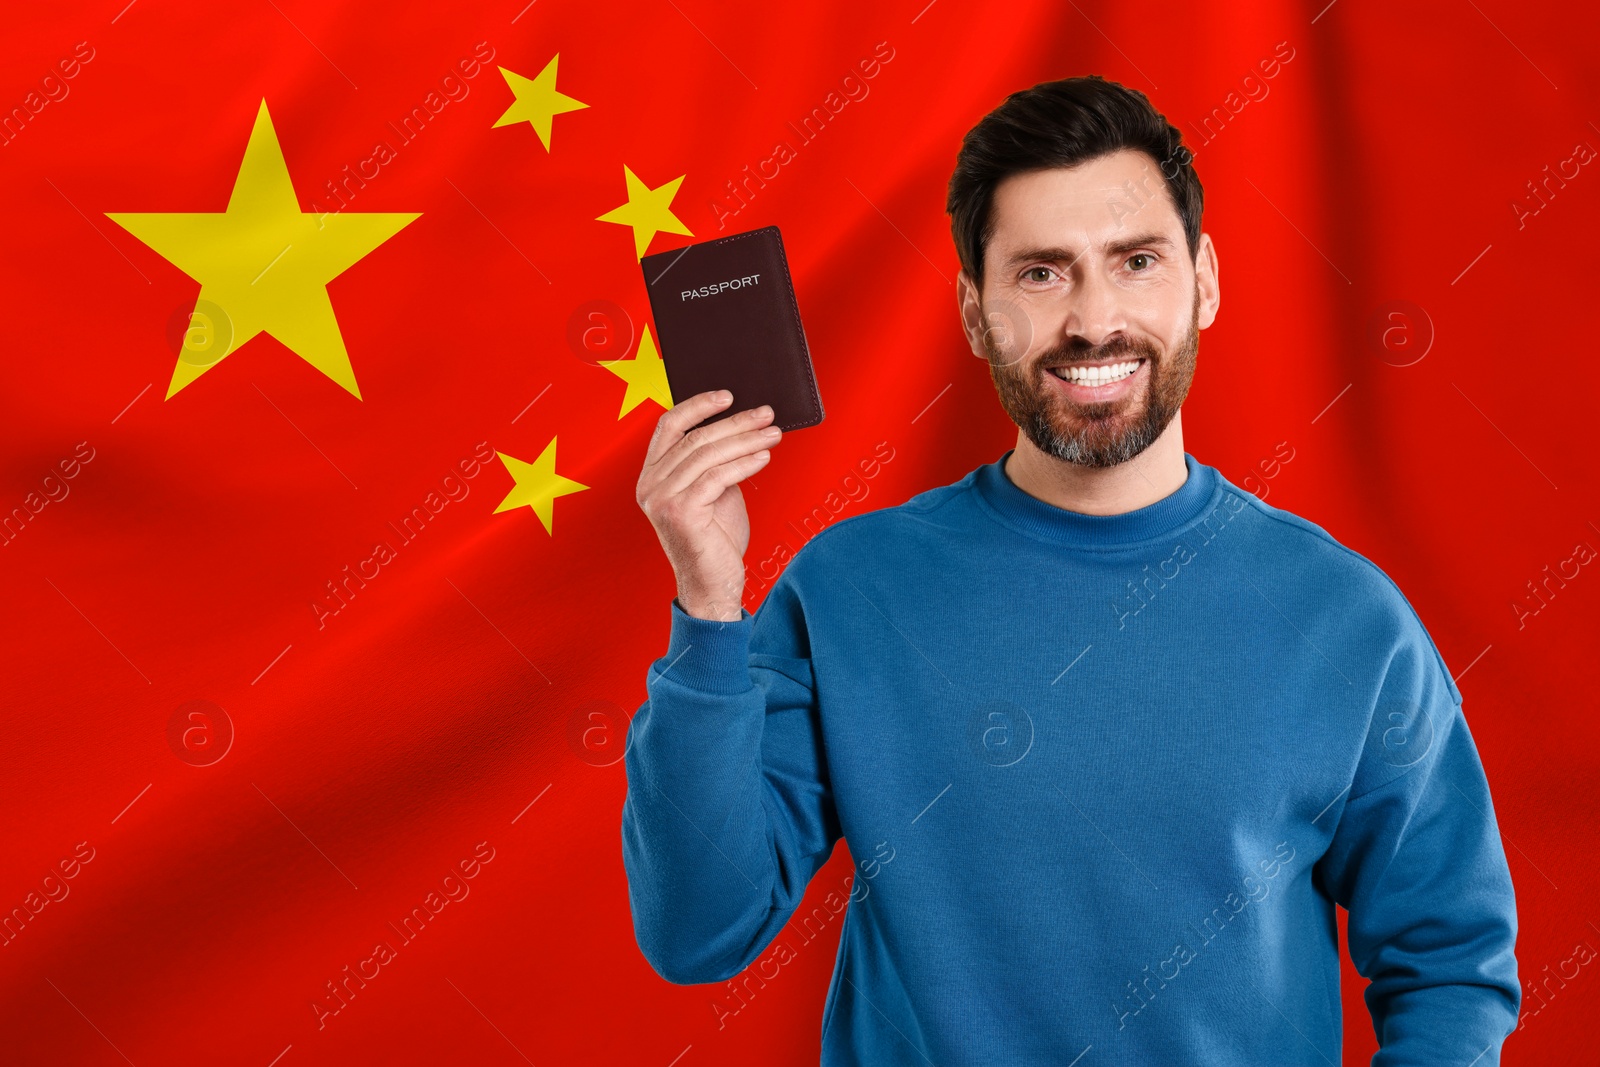 Image of Immigration. Happy man with passport against national flag of China, space for text